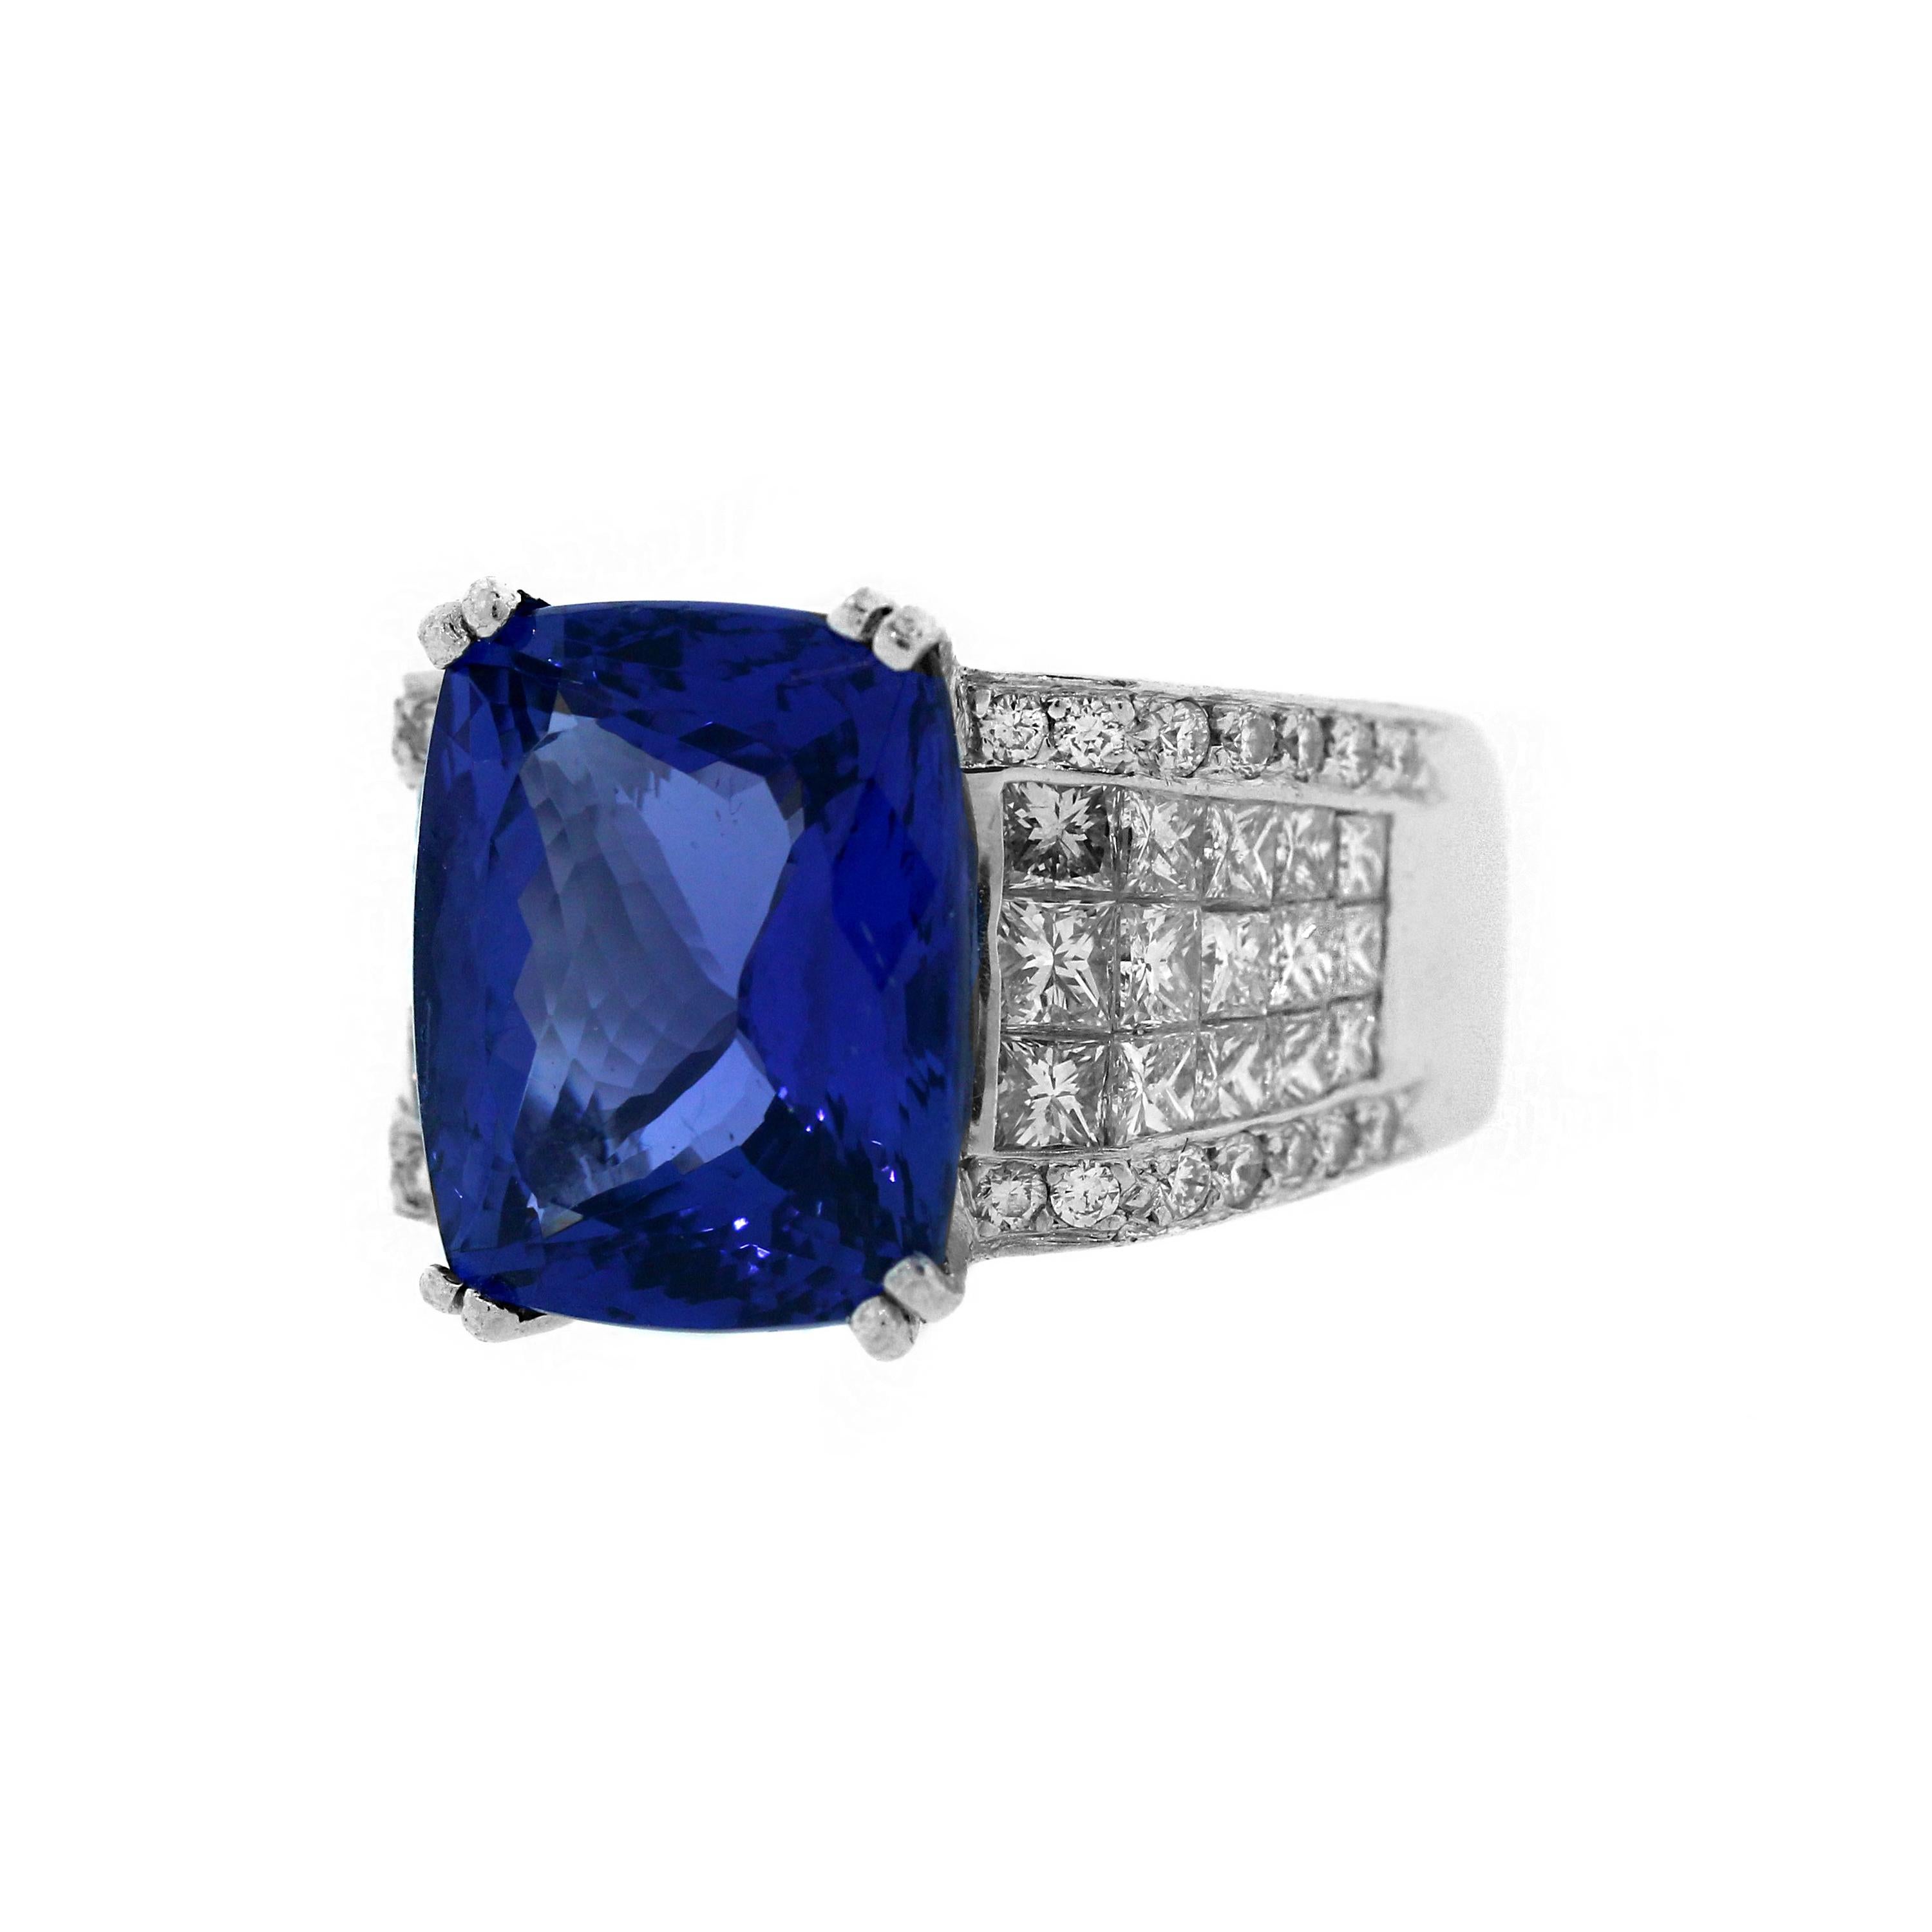 IF YOU ARE REALLY INTERESTED, CONTACT US WITH ANY REASONABLE OFFER. WE WILL TRY OUR BEST TO MAKE YOU HAPPY!

Platinum Ring with Radiant-cut Tanzanite center and Diamonds

10.50 carat. apprx. Tanzanite Center, Radiant cut

3.50 carat Round and